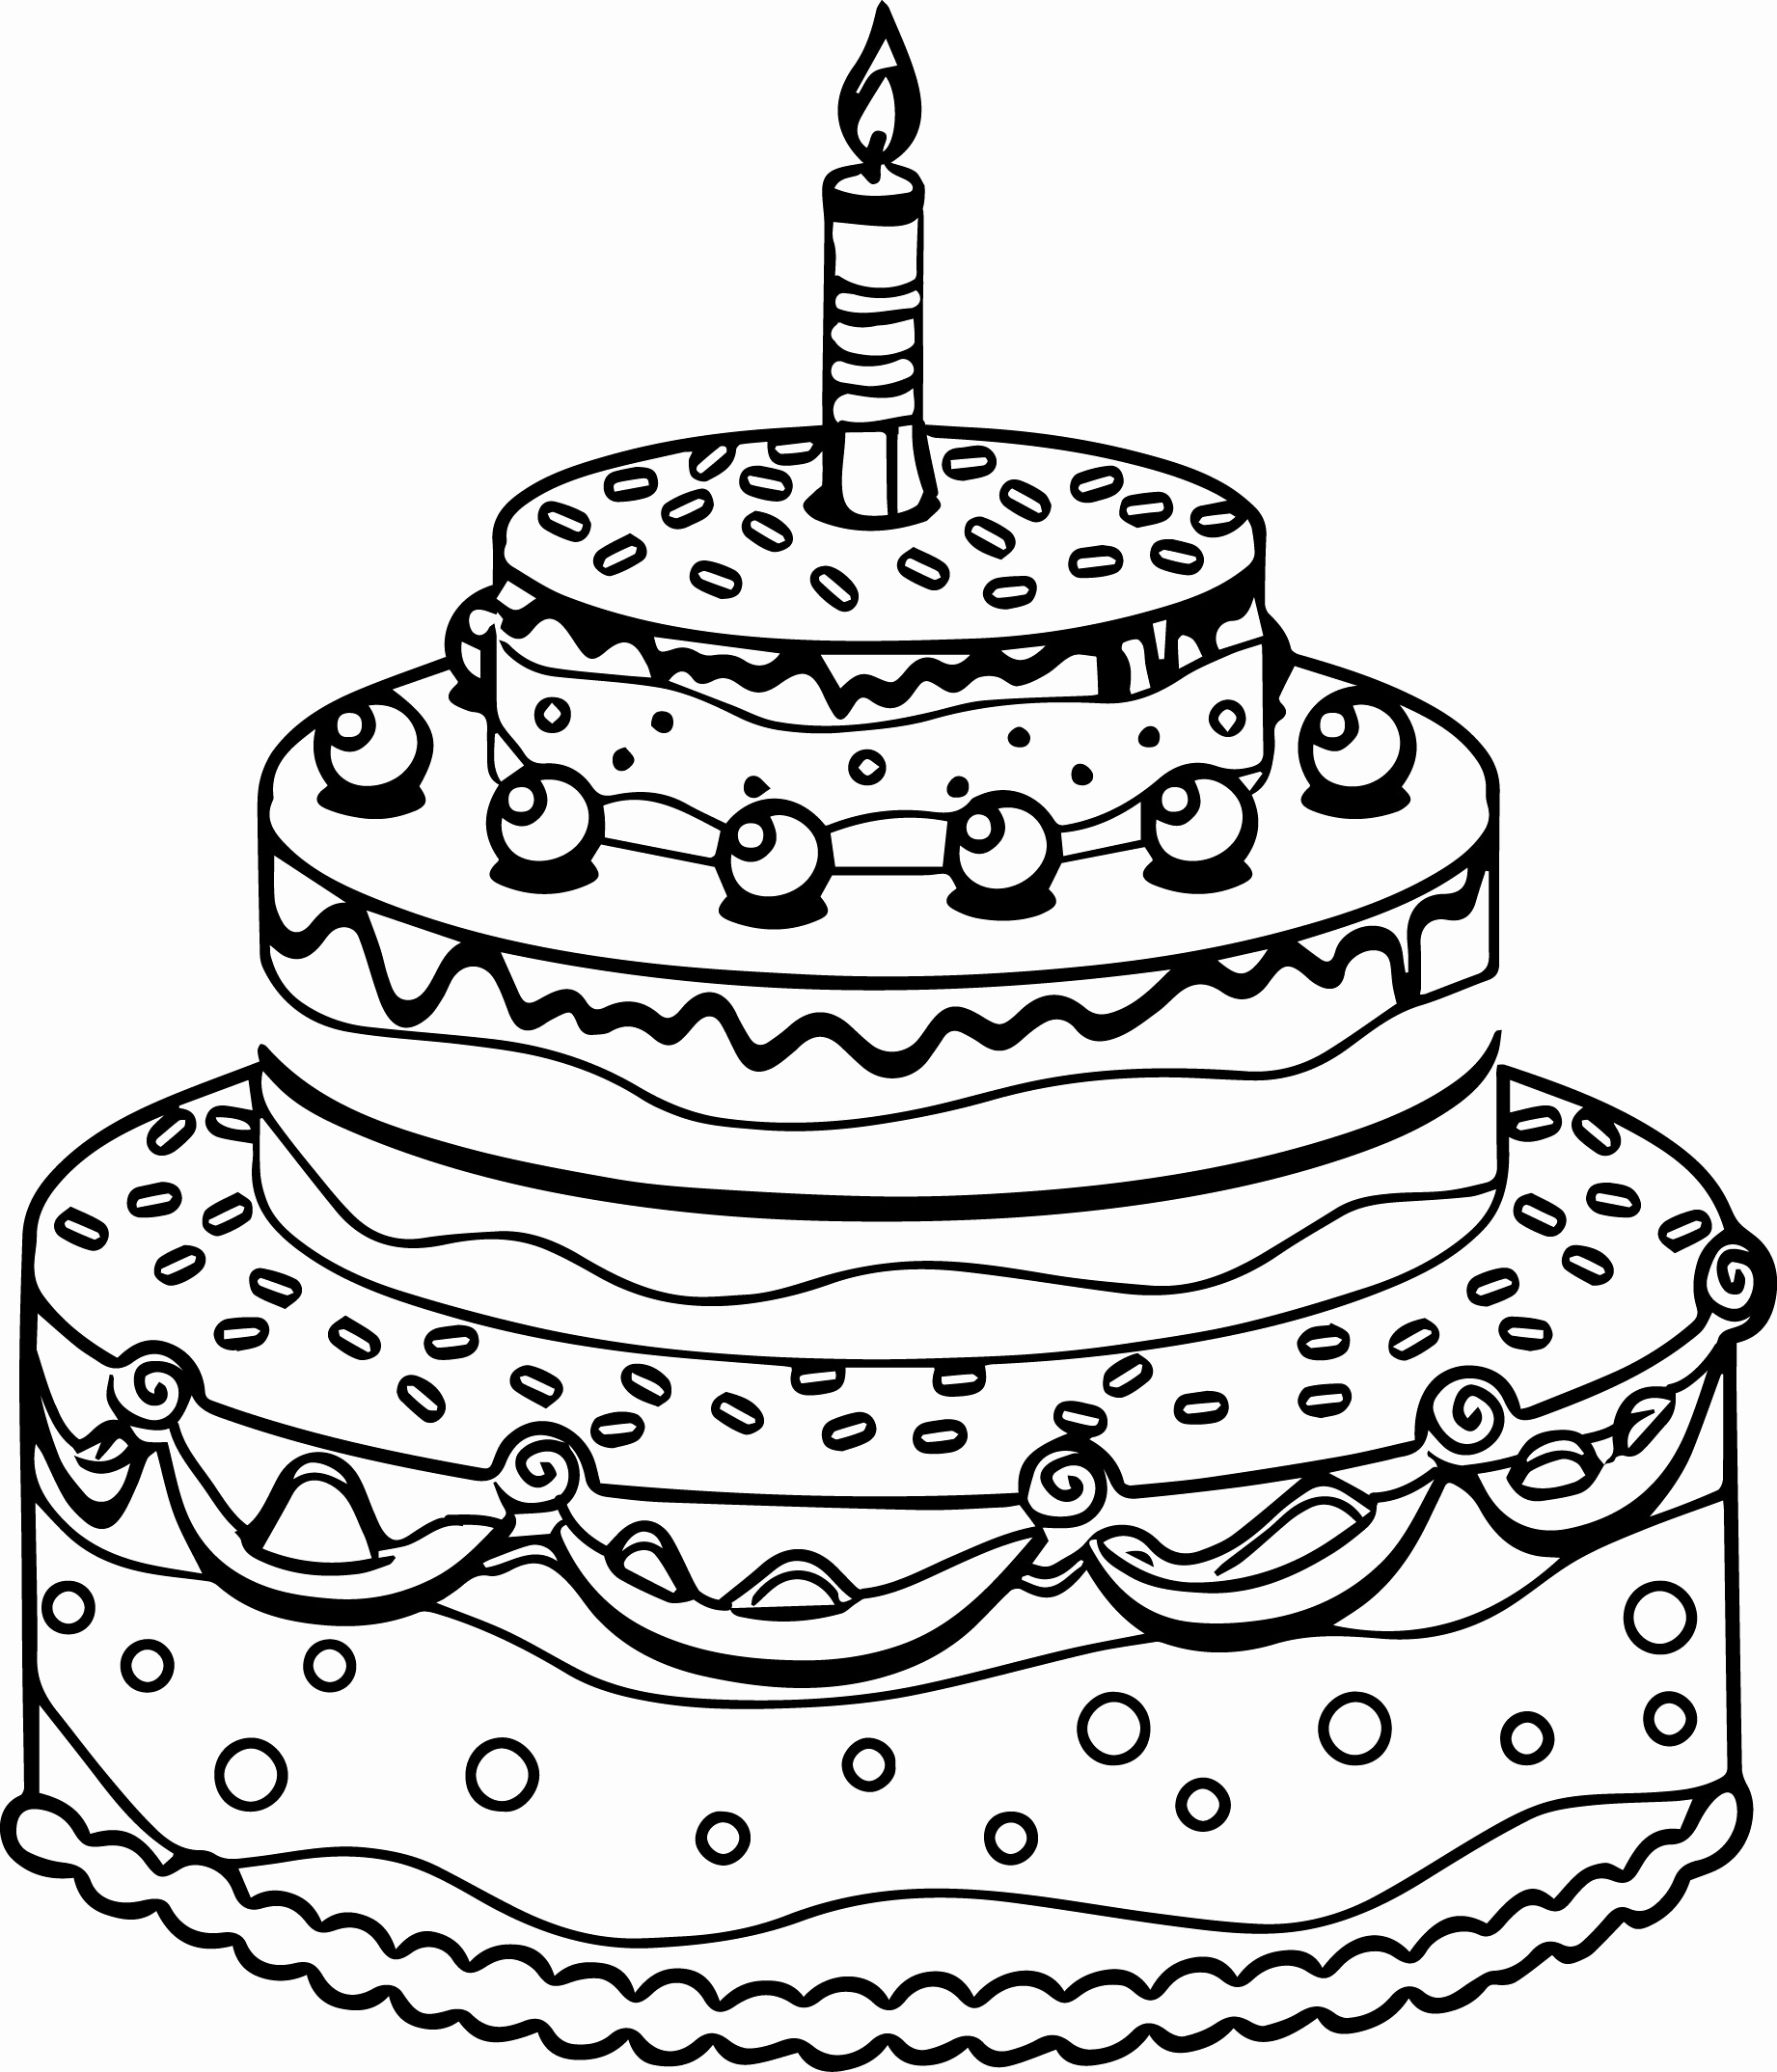 Birthday Cake Coloring Page At GetColorings Free Printable 